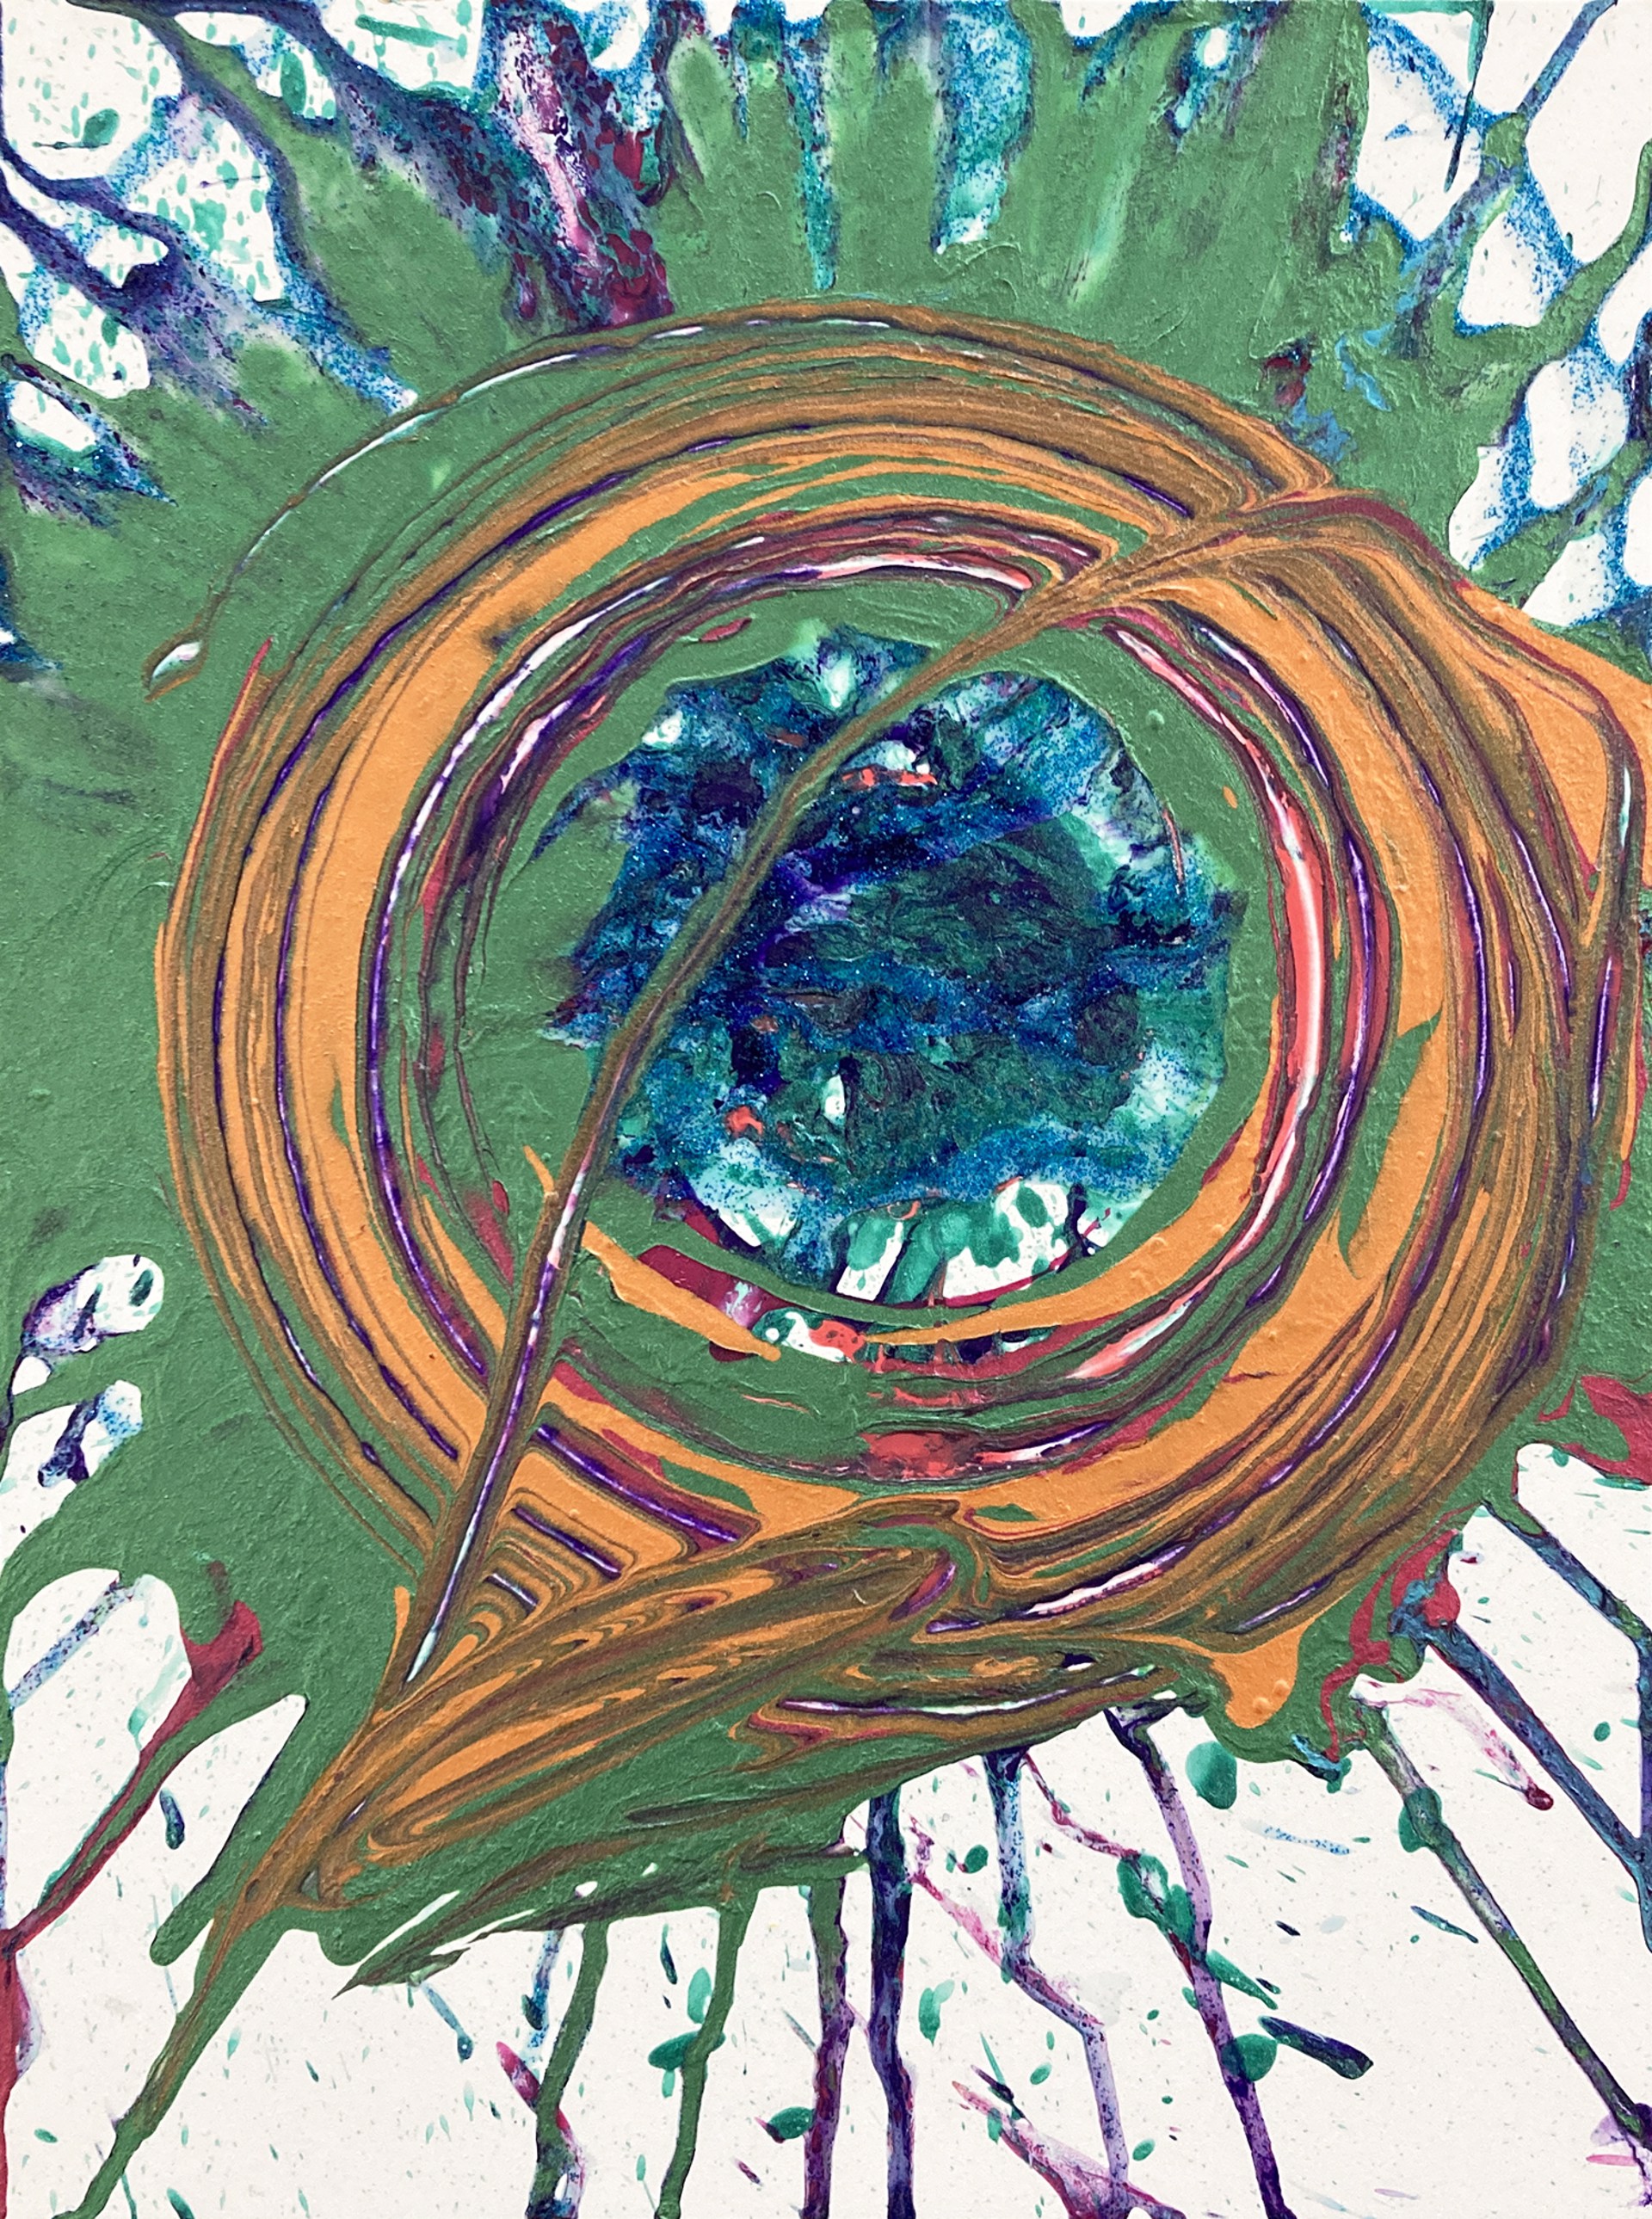 "Green and Orange Swirl" by Will, EAS by Autism Academy